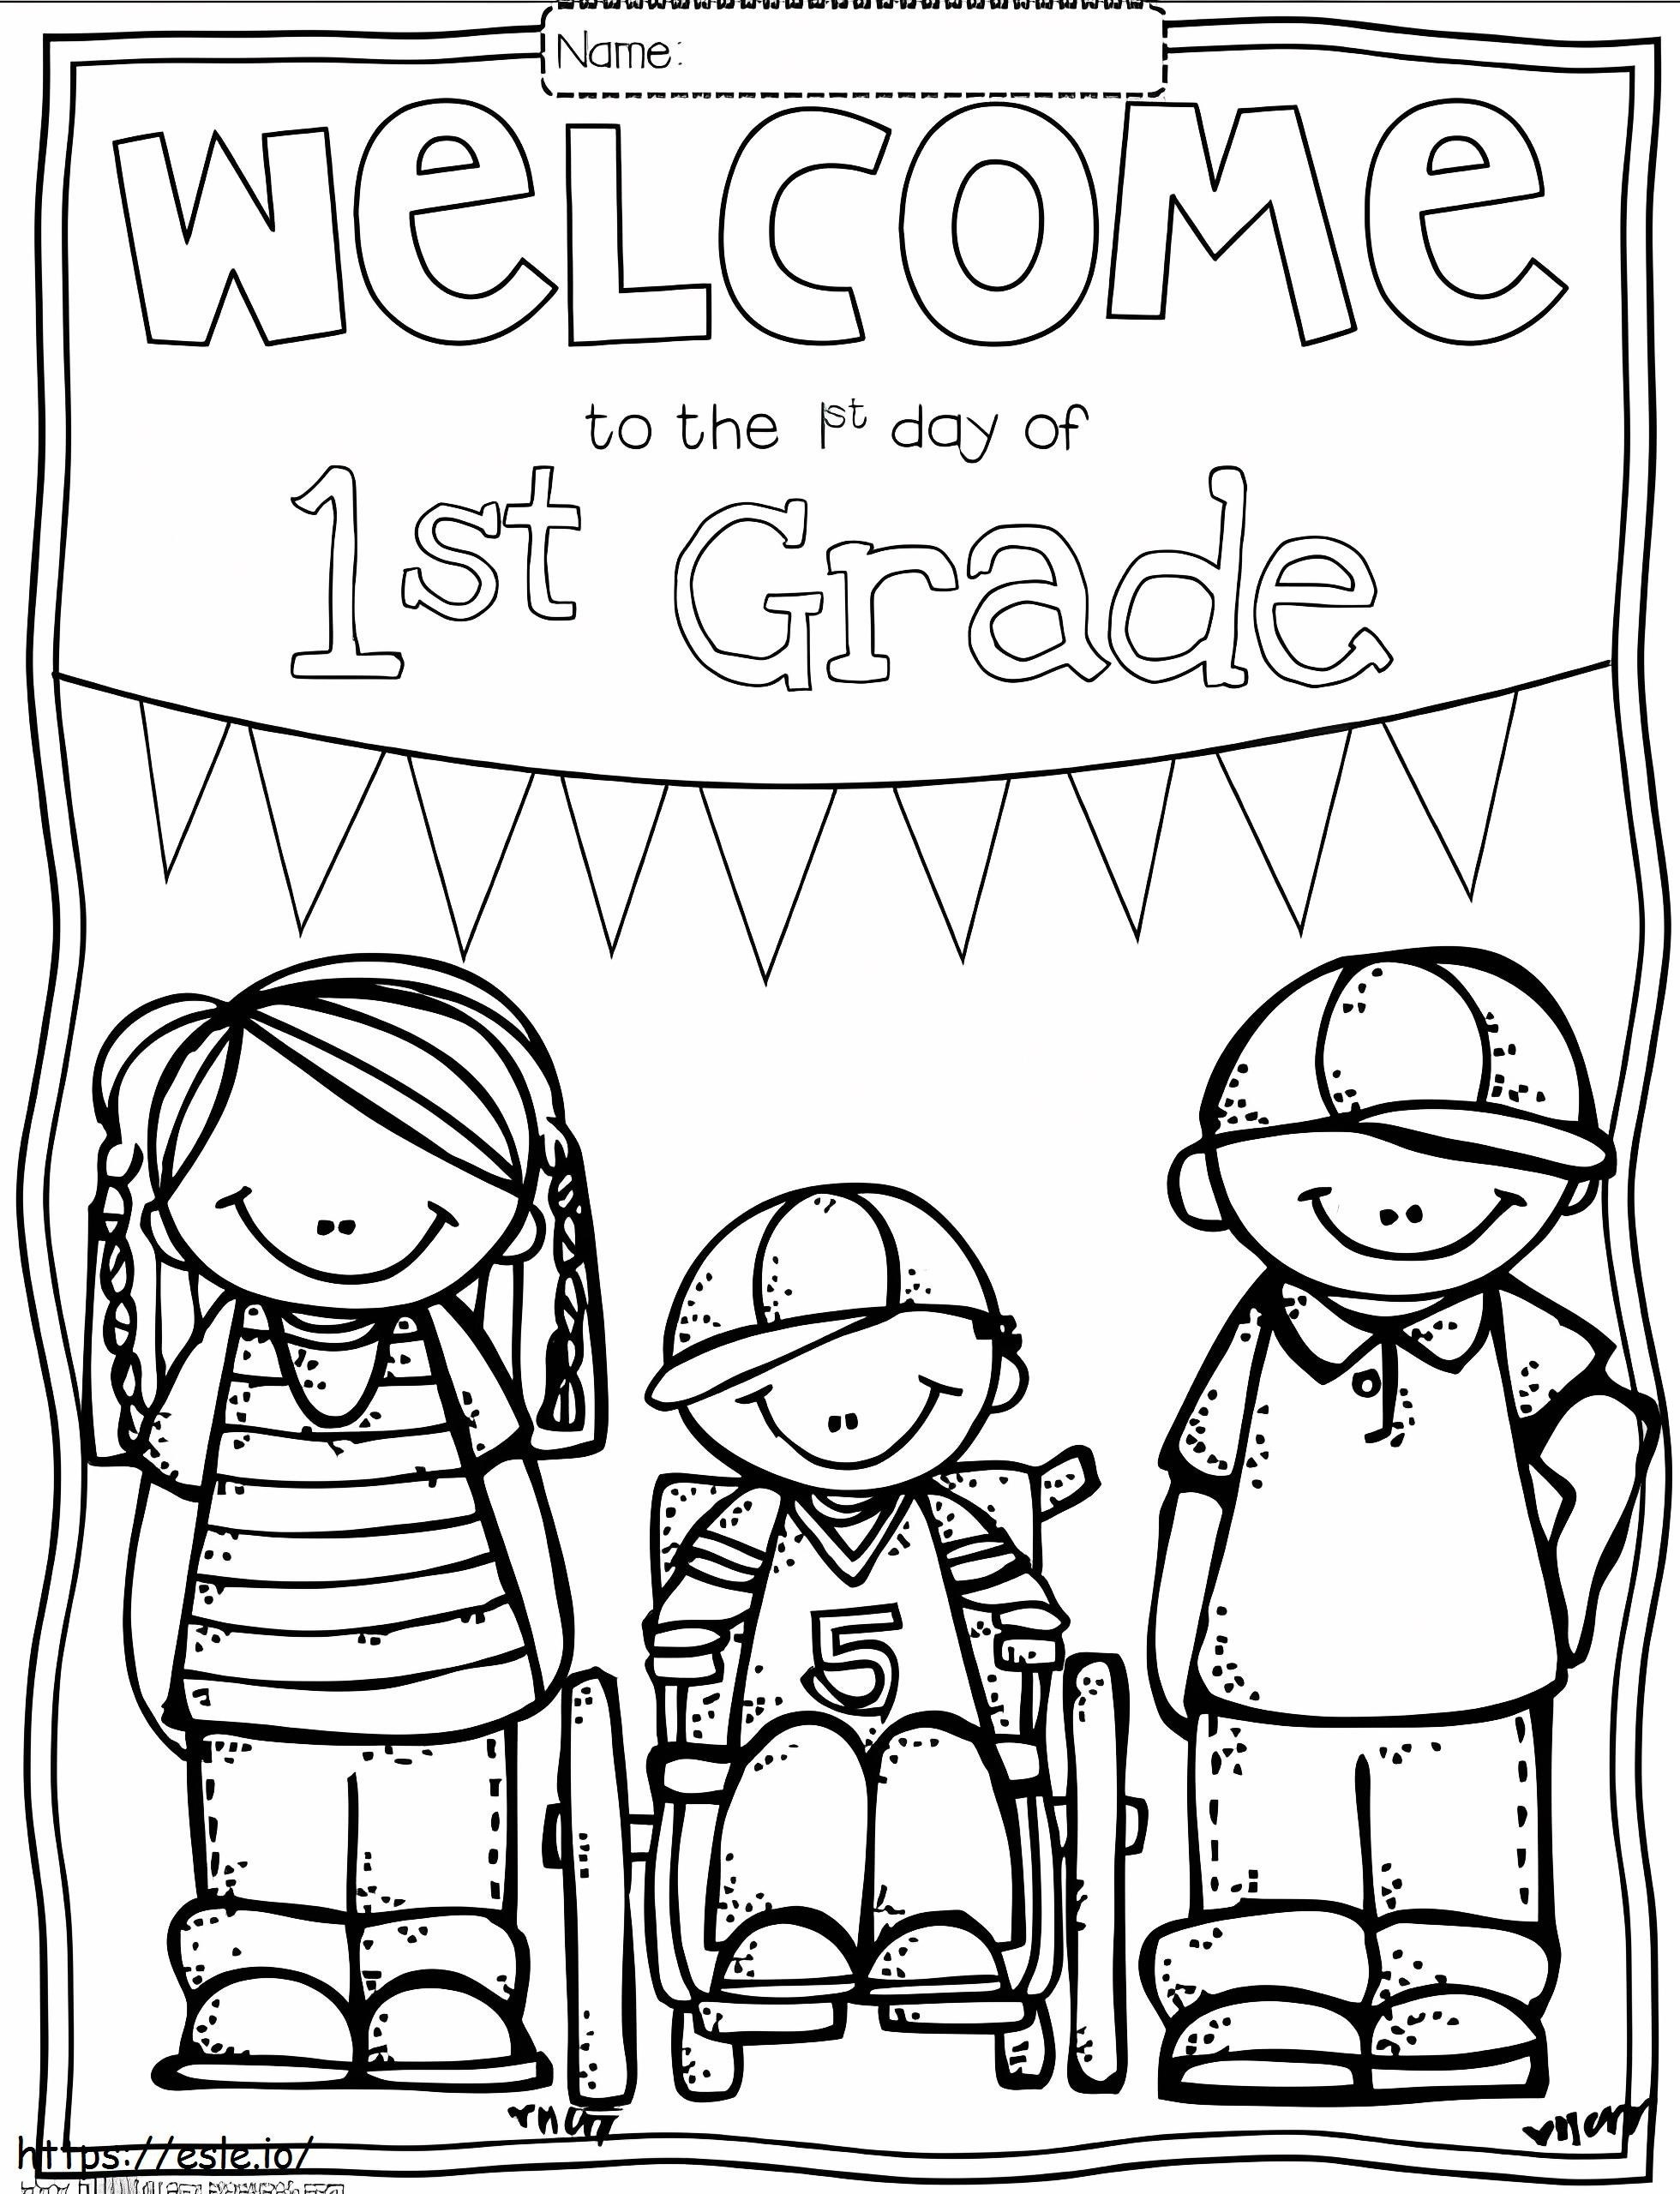 Welcome Back To School coloring page